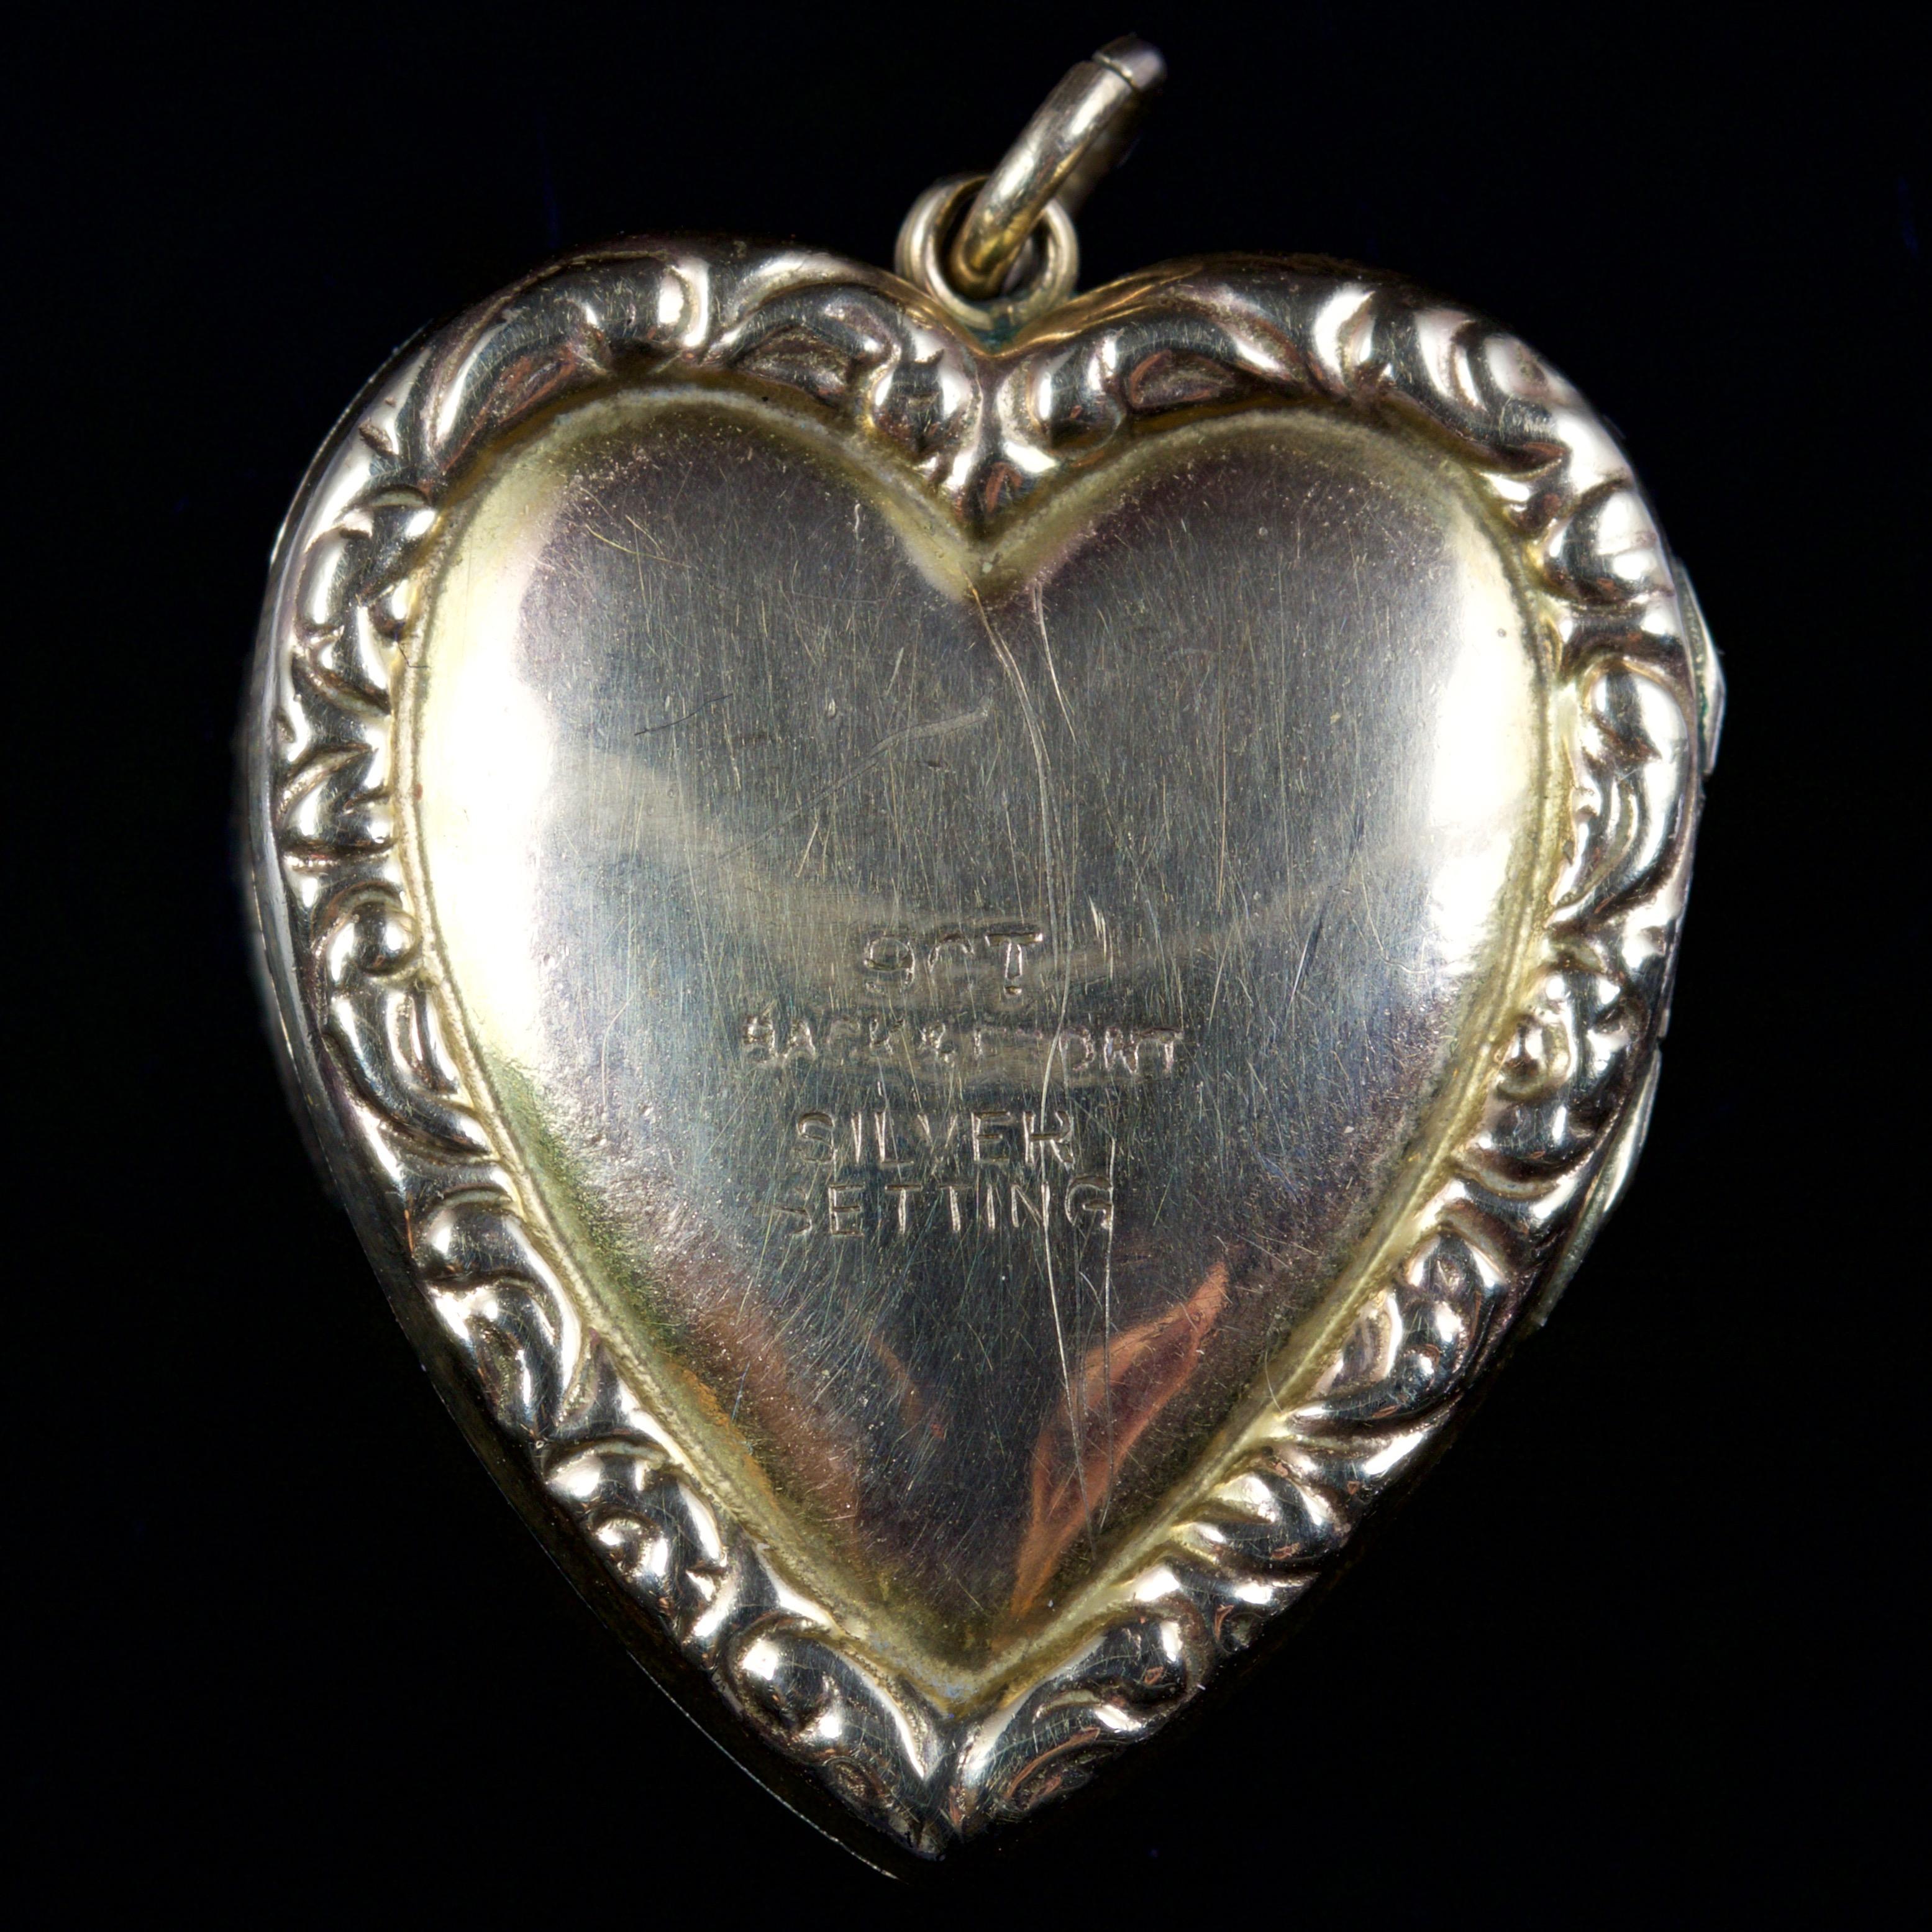 This beautiful Victorian Garnet and Pearl heart locket is, Circa 1900.

The locket displays a cluster of Garnets in the centre, surrounded by engraved leaves with lustrous Pearls set into them.

It is set in 9ct Gold and a Silver.

The Garnet is a